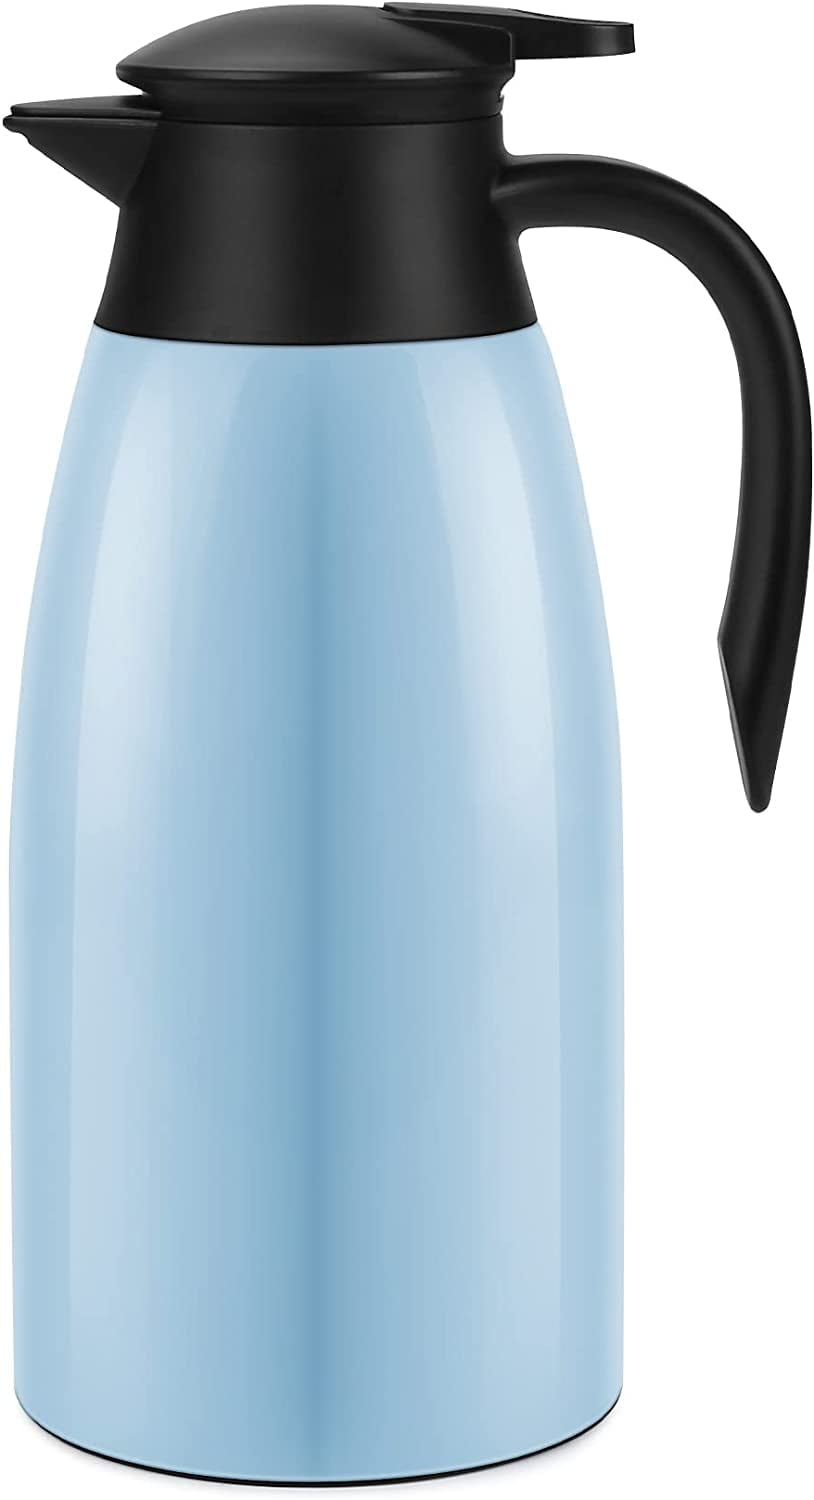 Thermal Coffee Carafe 68oz 2L-12 Hours Hot Water Algeria